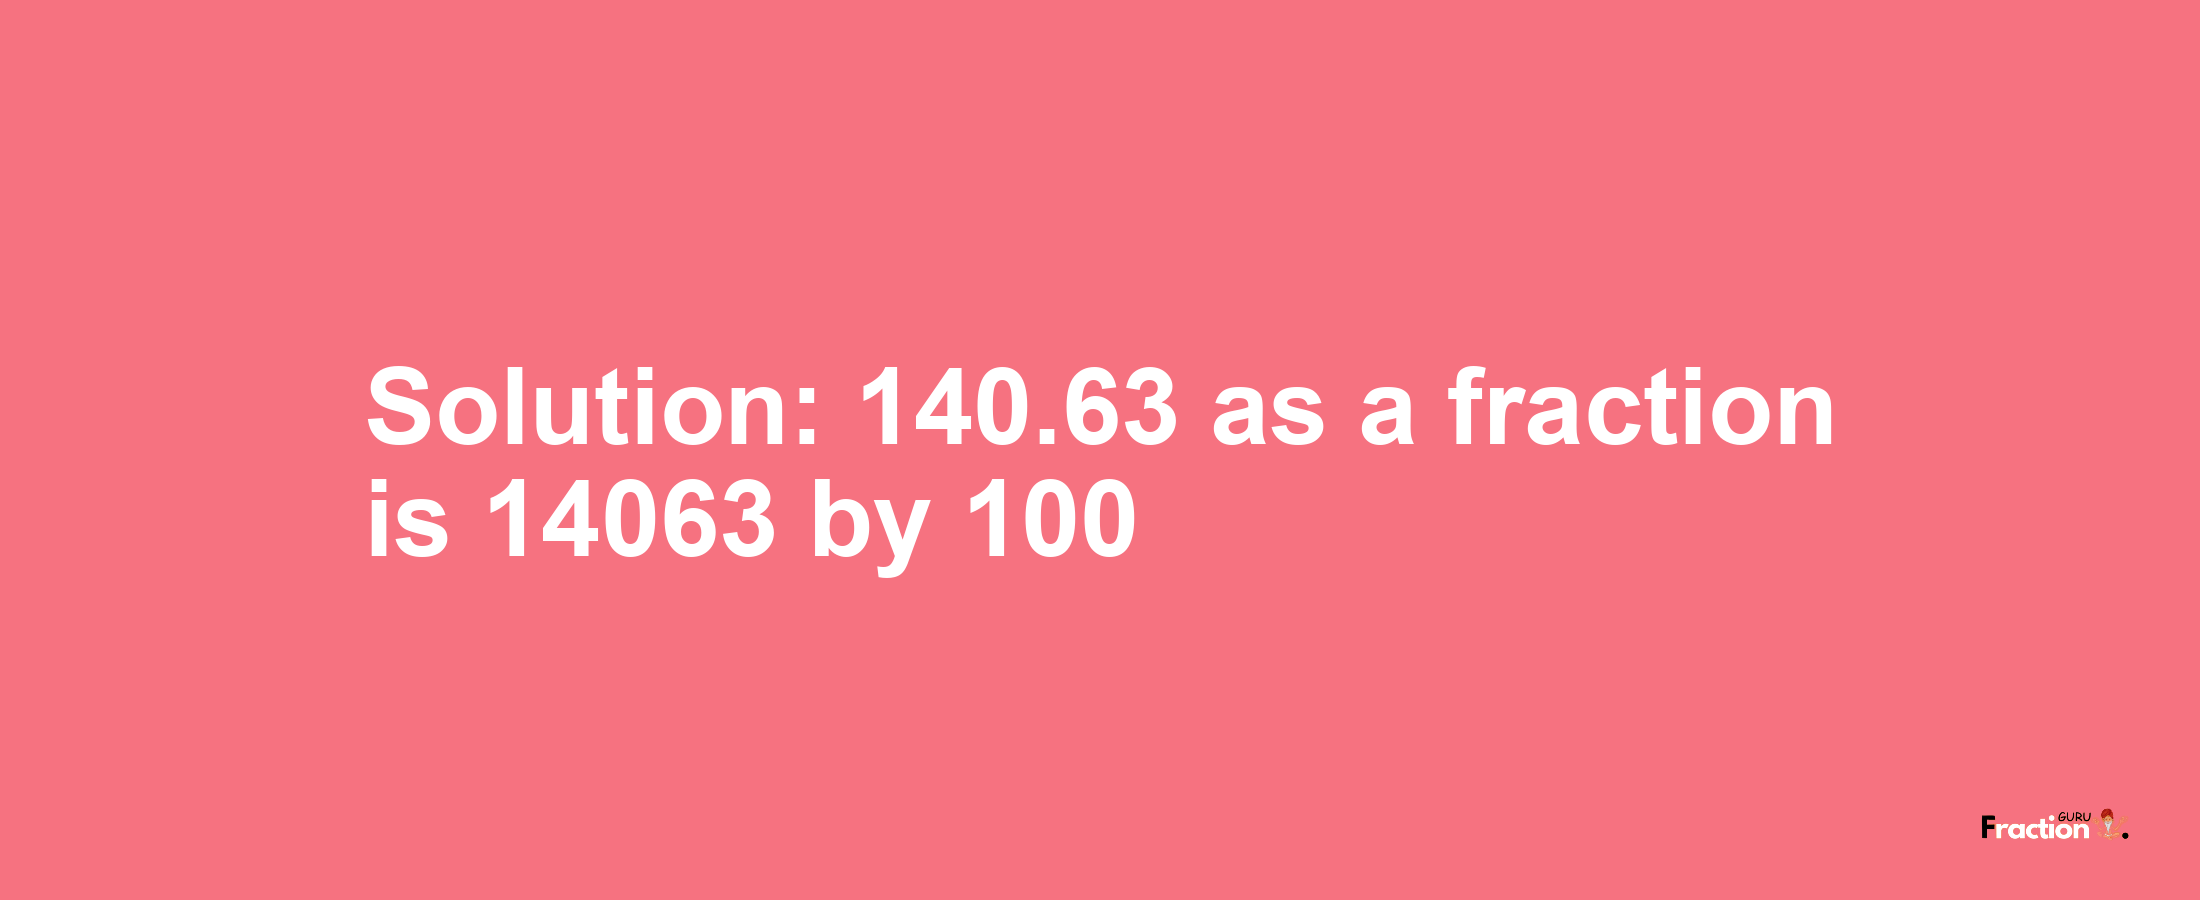 Solution:140.63 as a fraction is 14063/100